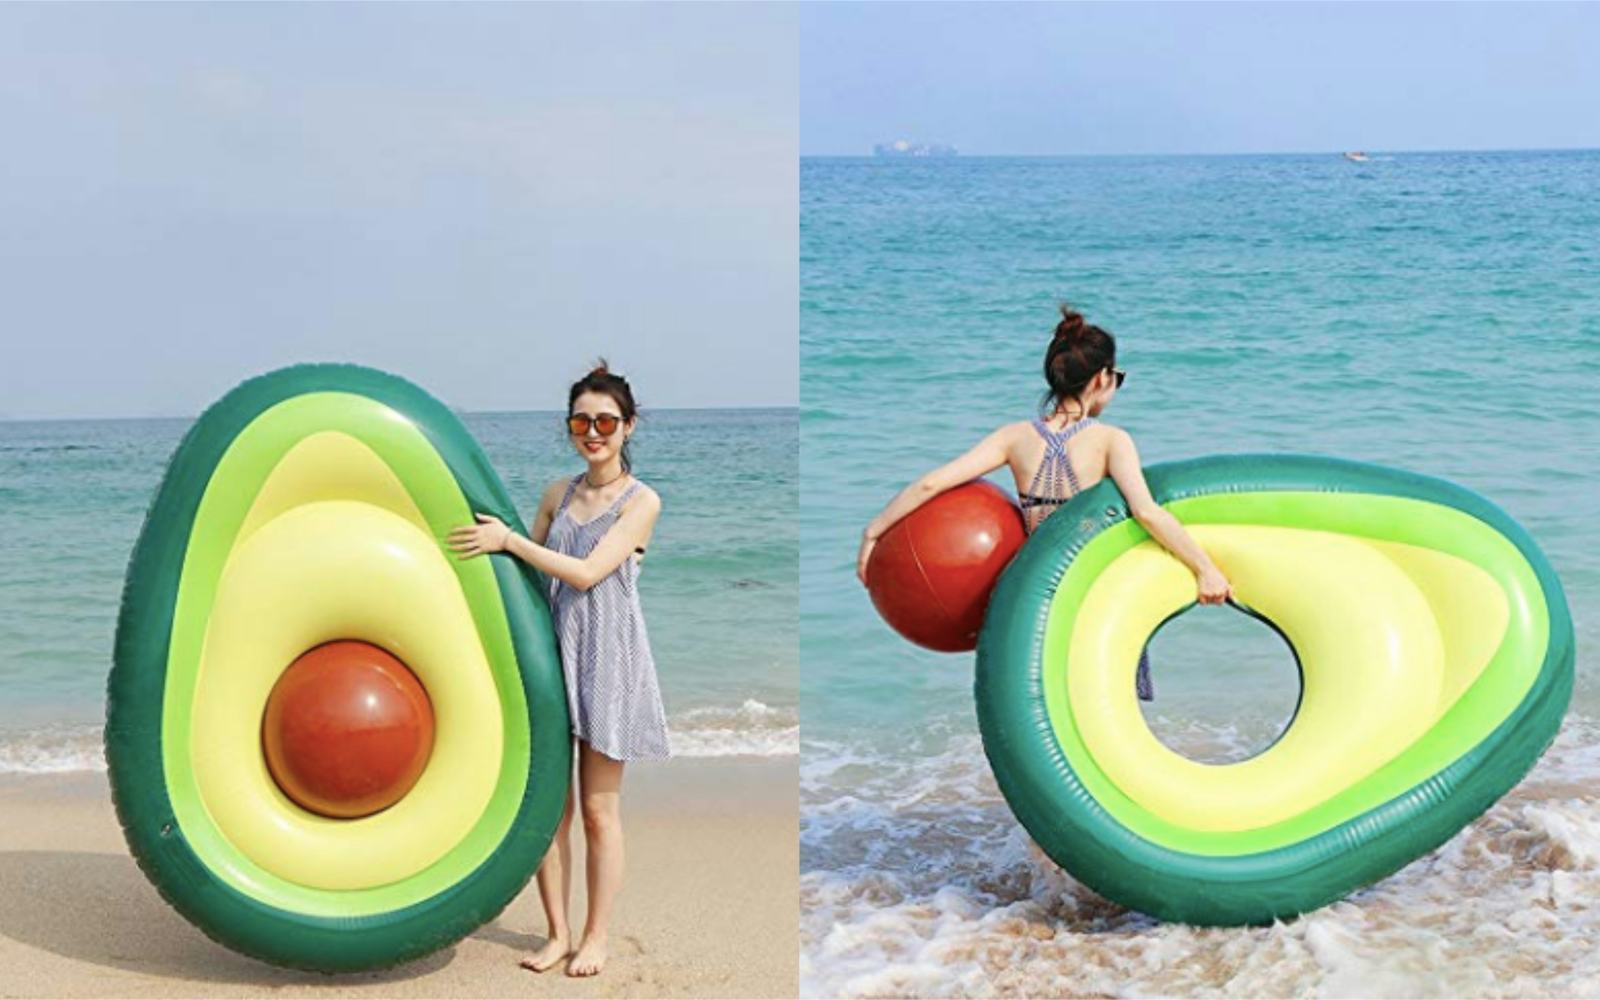 This Avocado Pool Float Comes With A Removable Beach Ball Pit.